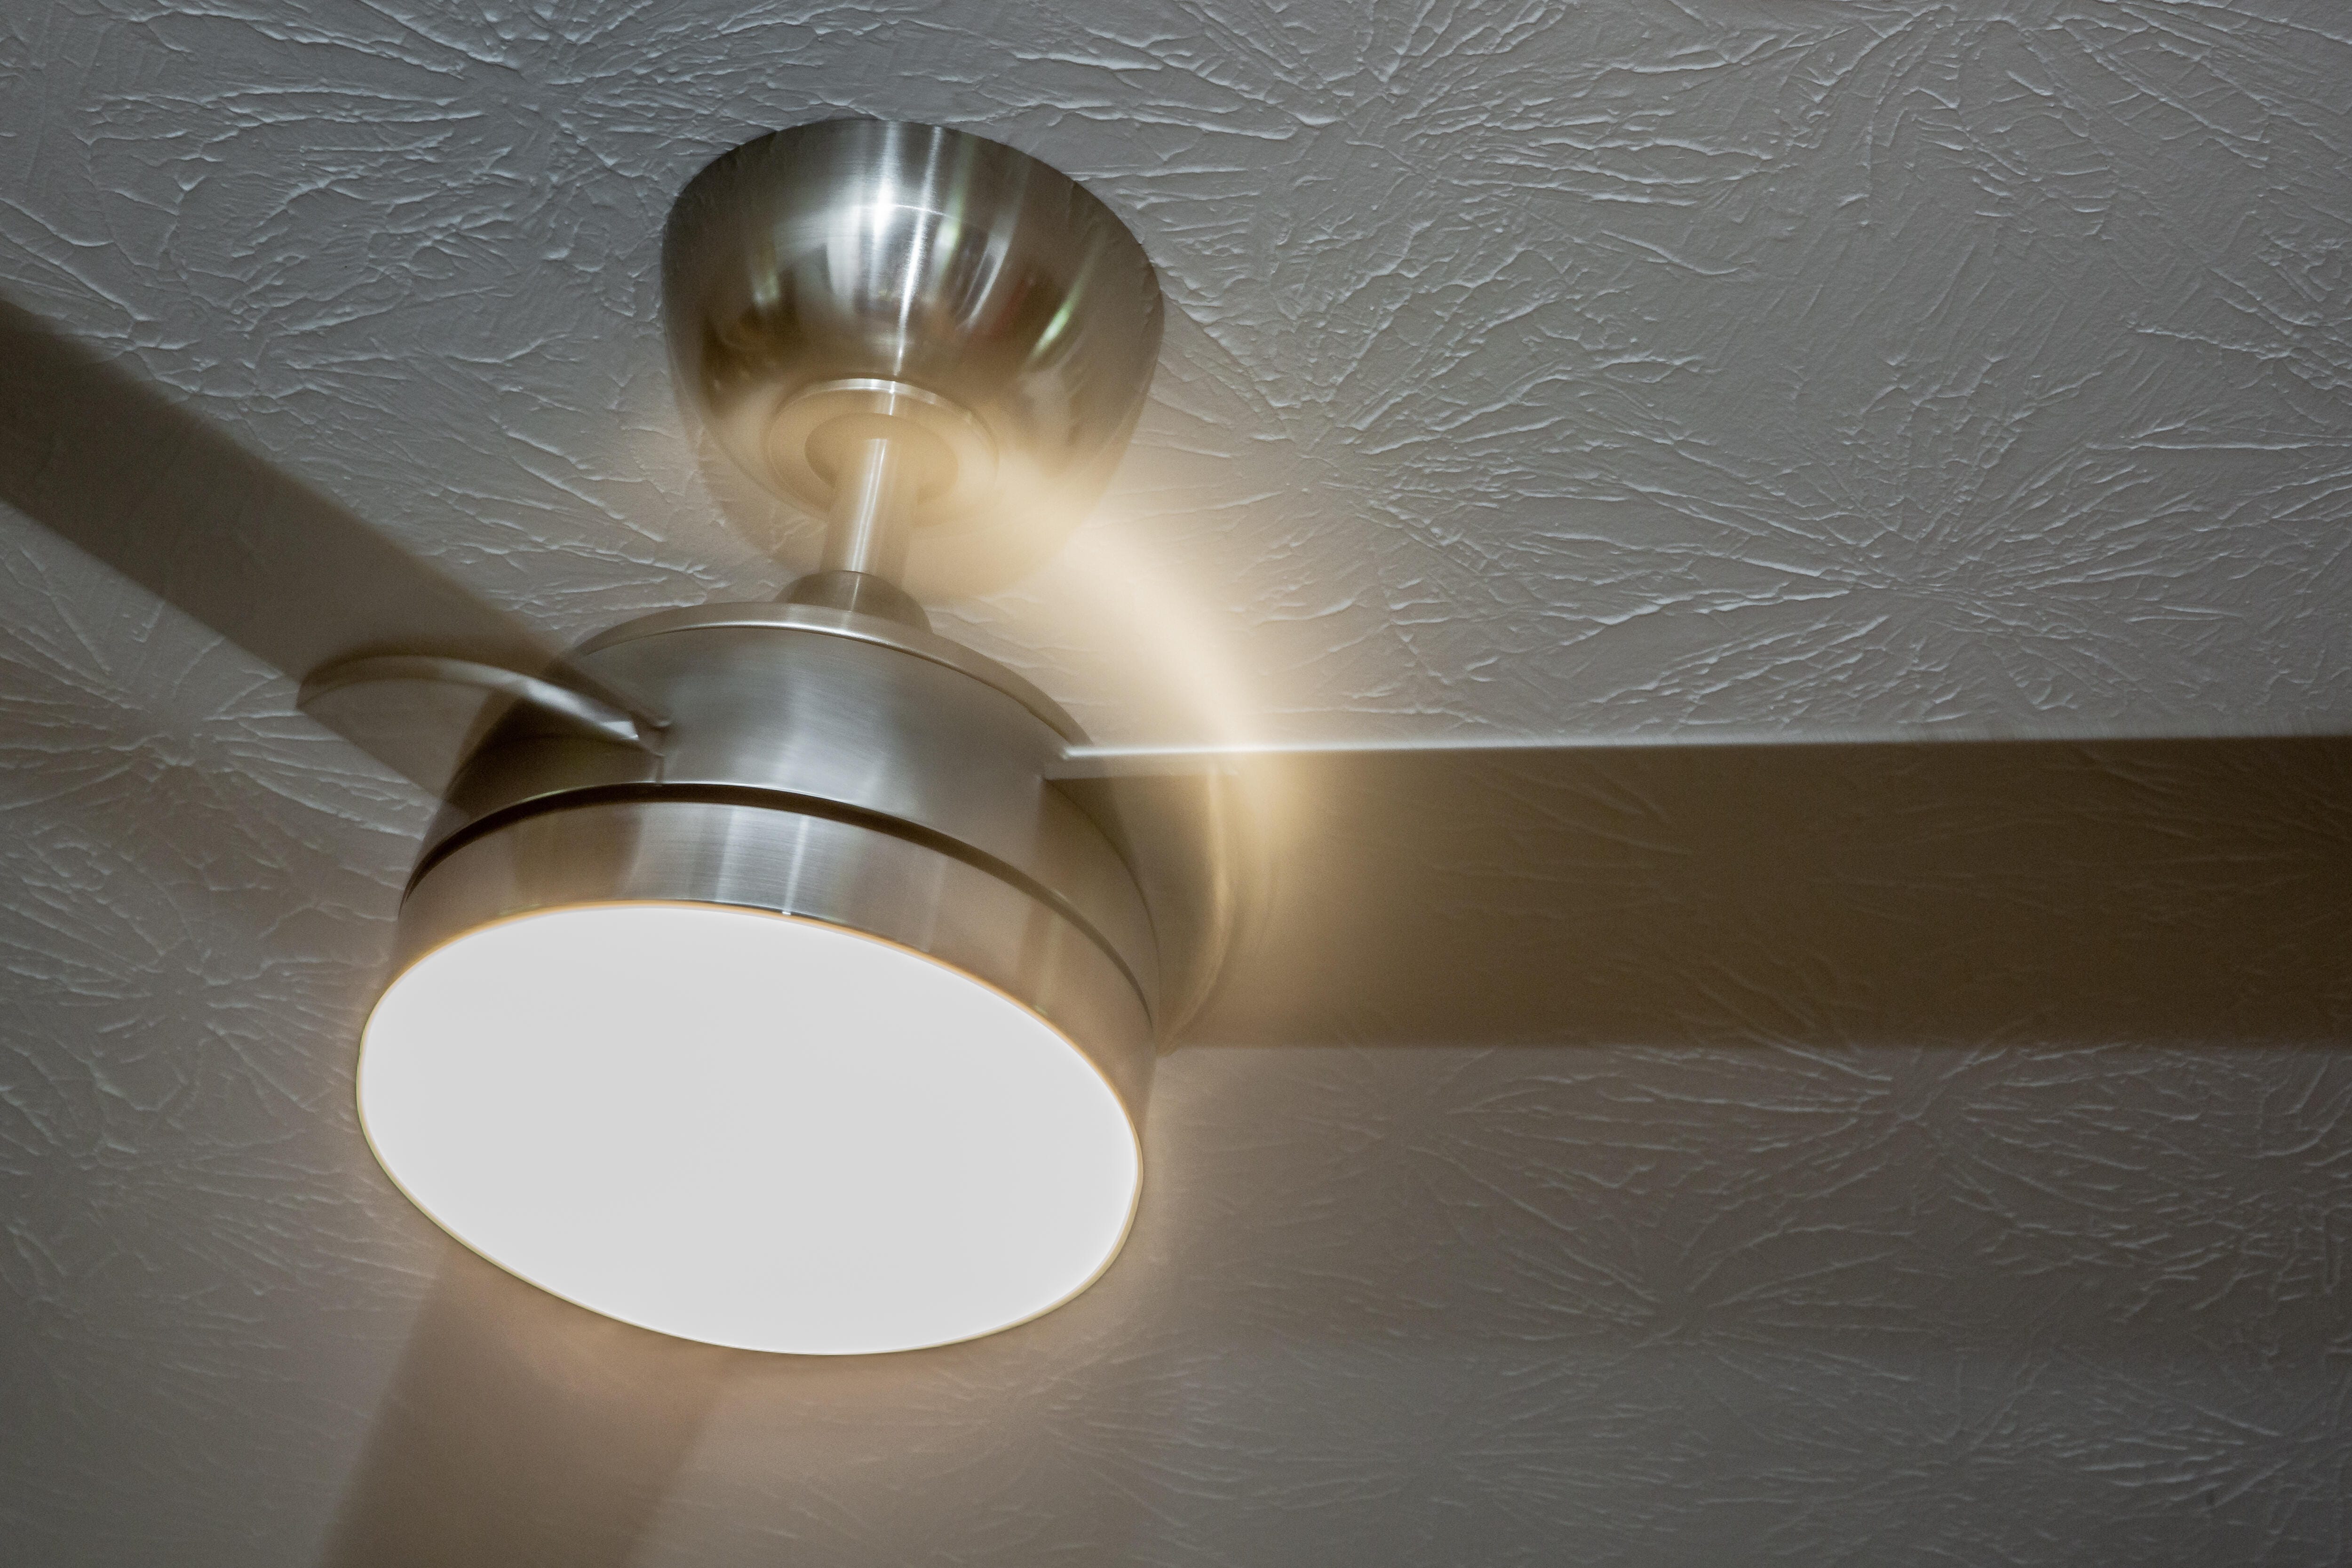 The Awesome Ceiling Fan Trick You Need To Try This Summer